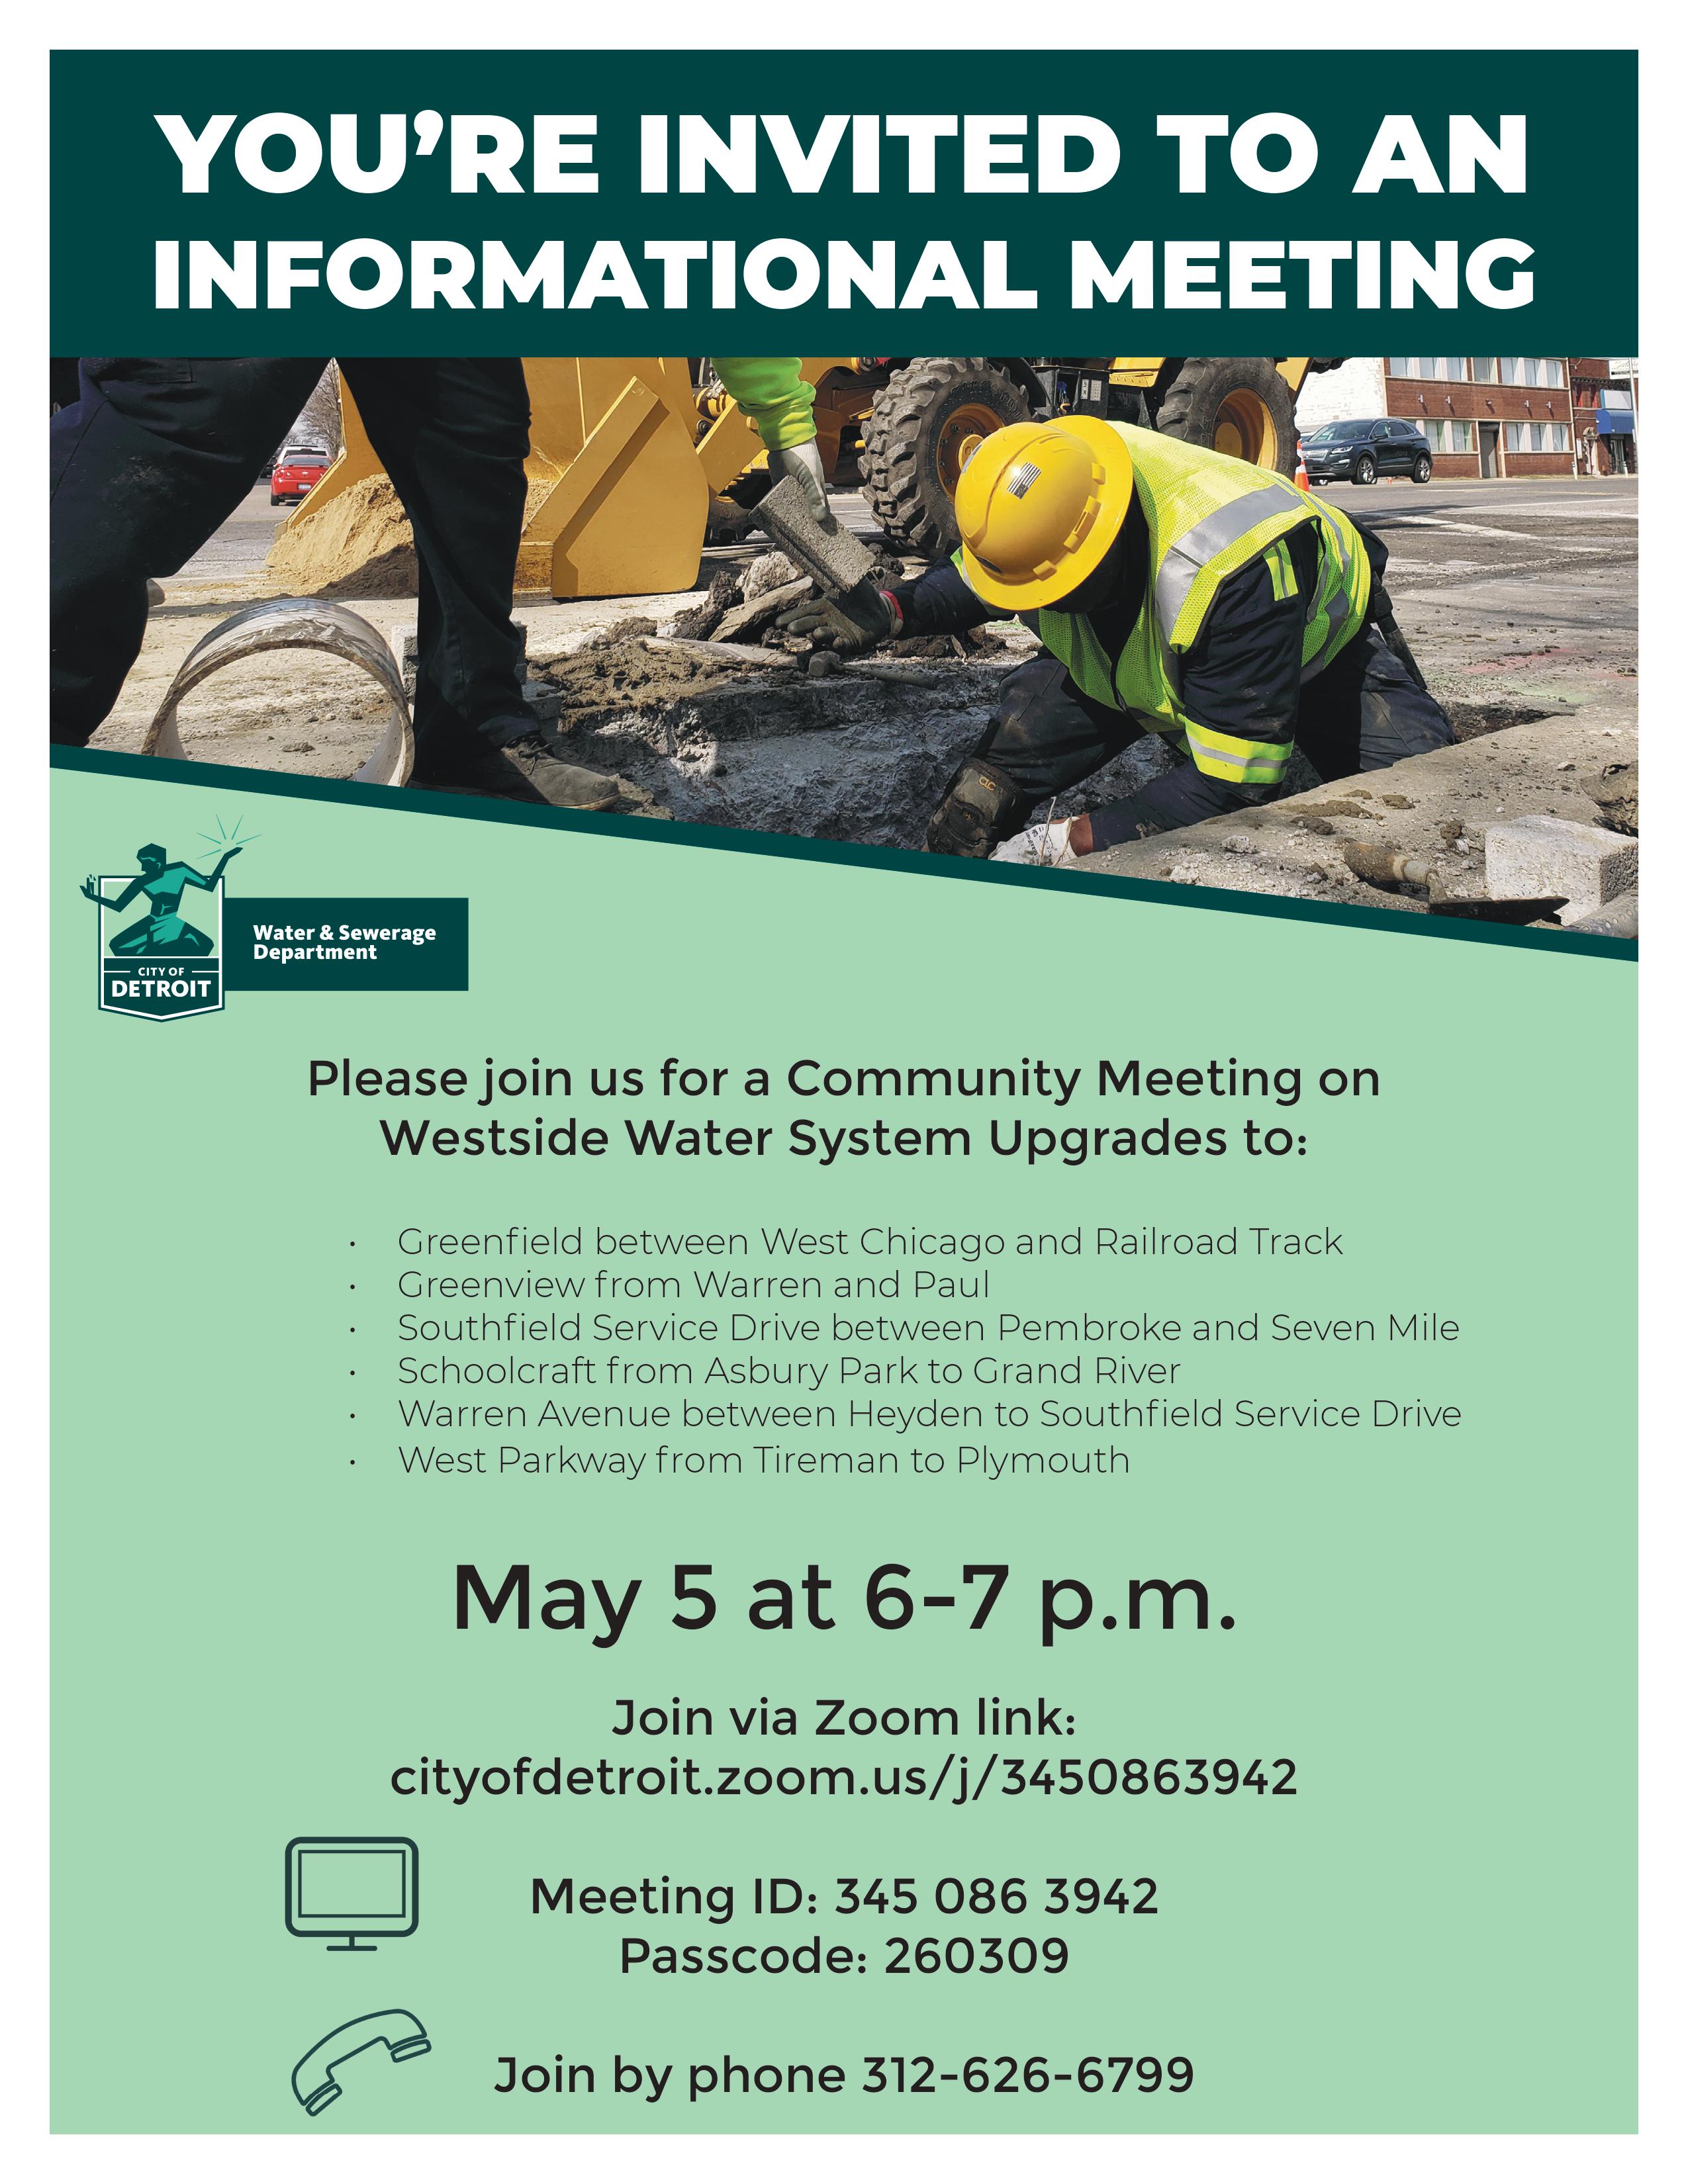 DWSD Community Meeting: Water & Sewer Upgrades on Westside Water System Upgrades